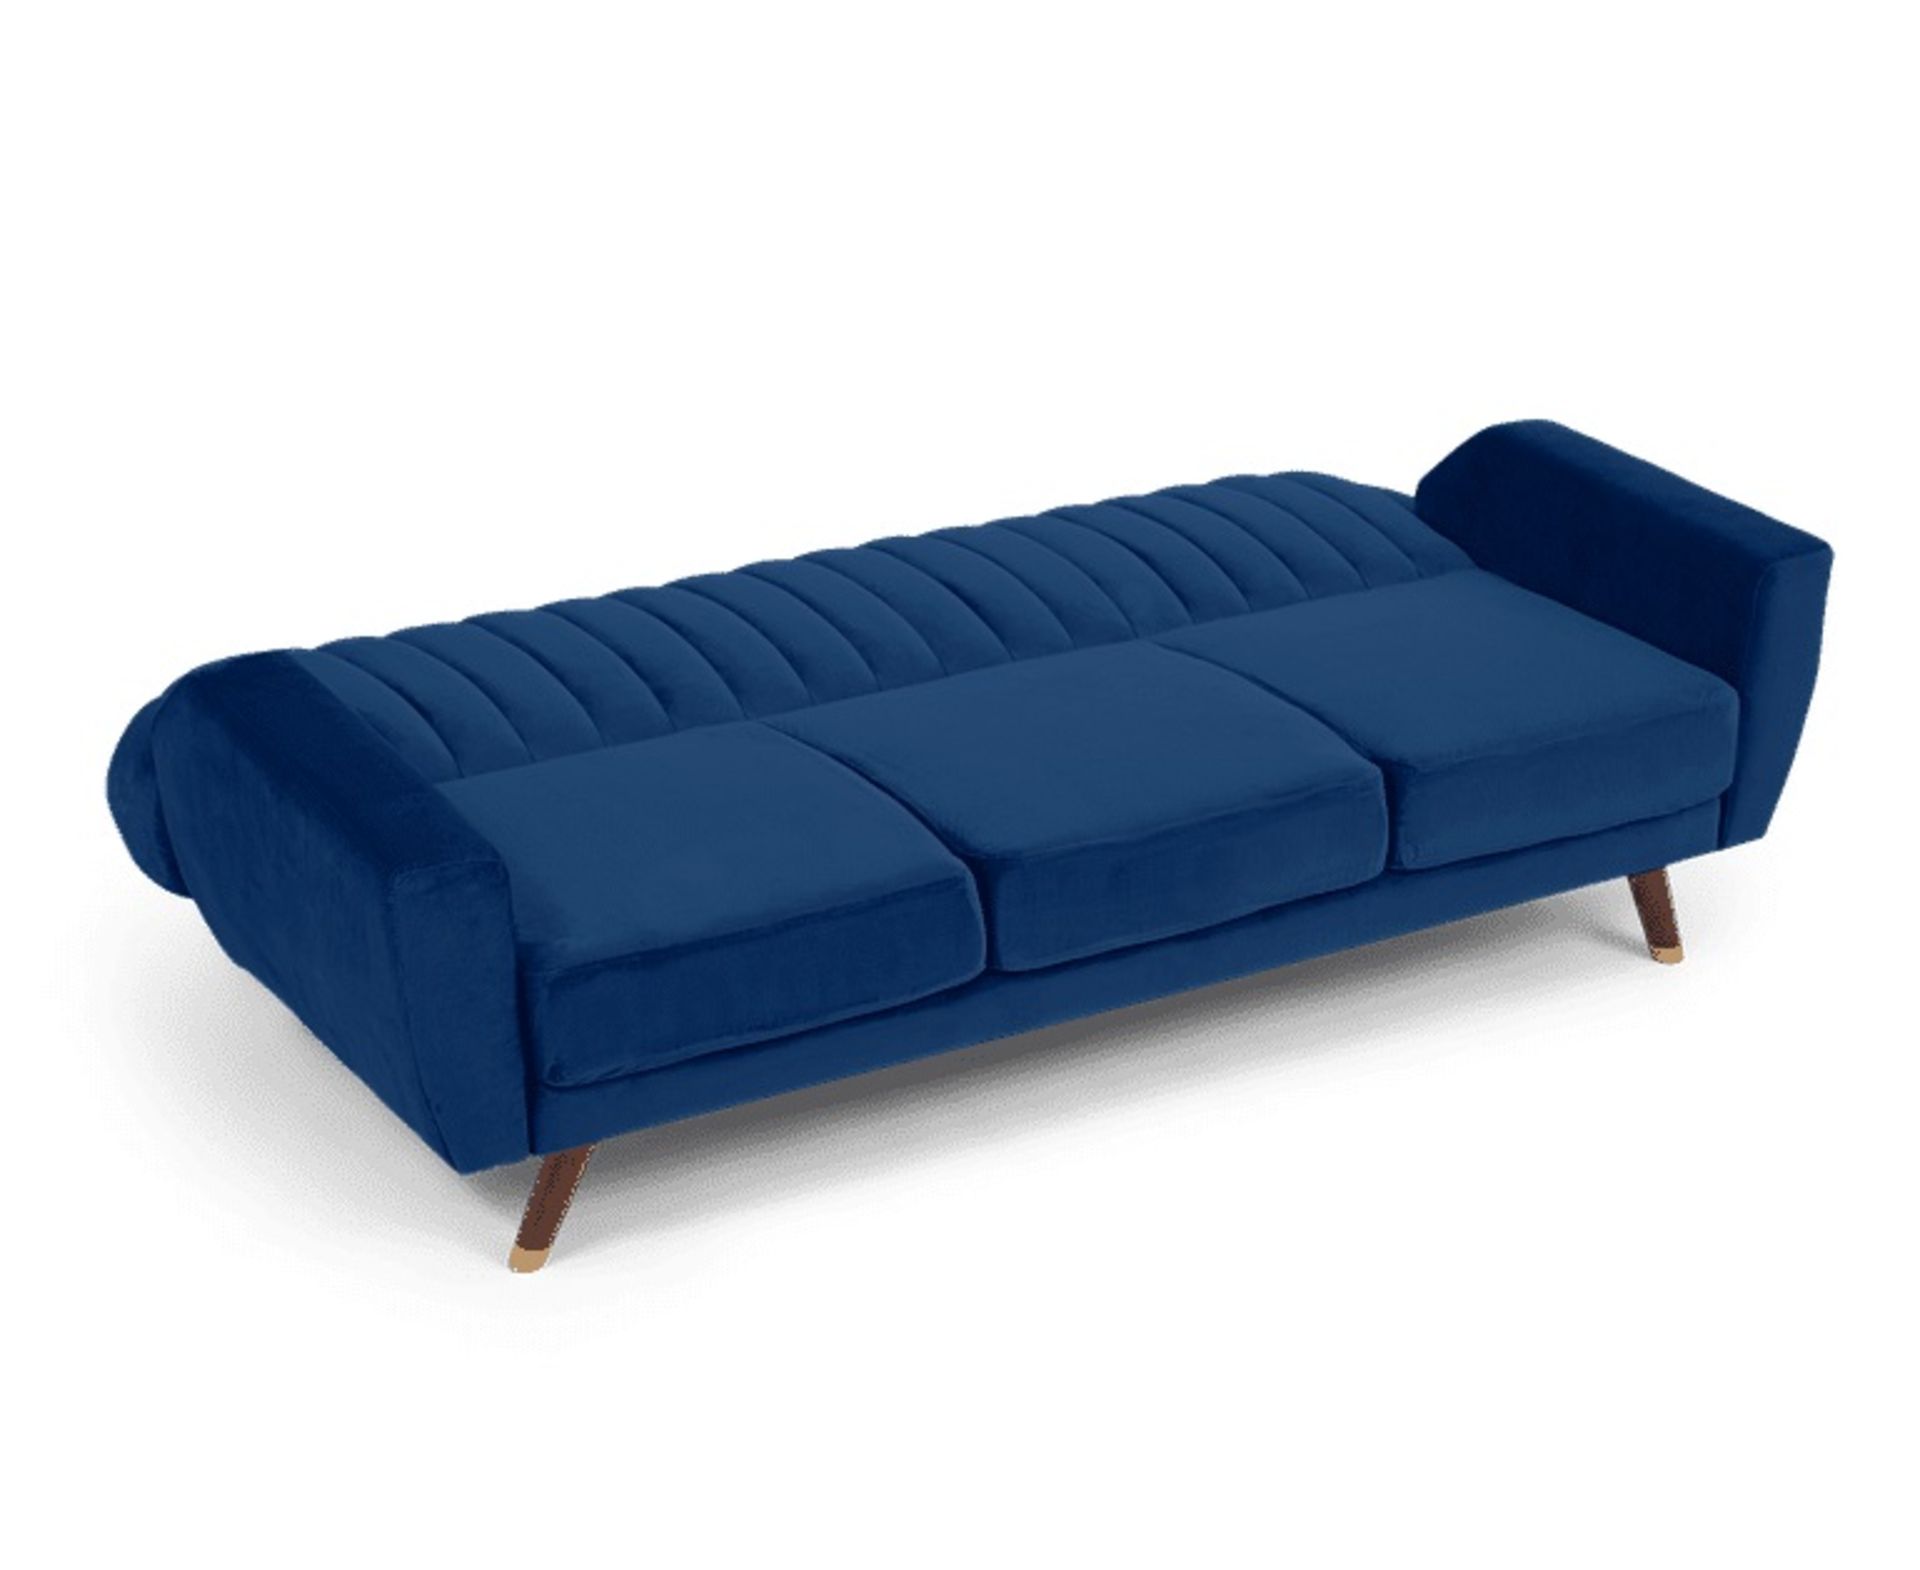 Lucia Sofa Bed In Blue Velvet A Beautiful Curved Backrest And Contrasting Dark Wooden Legs - The